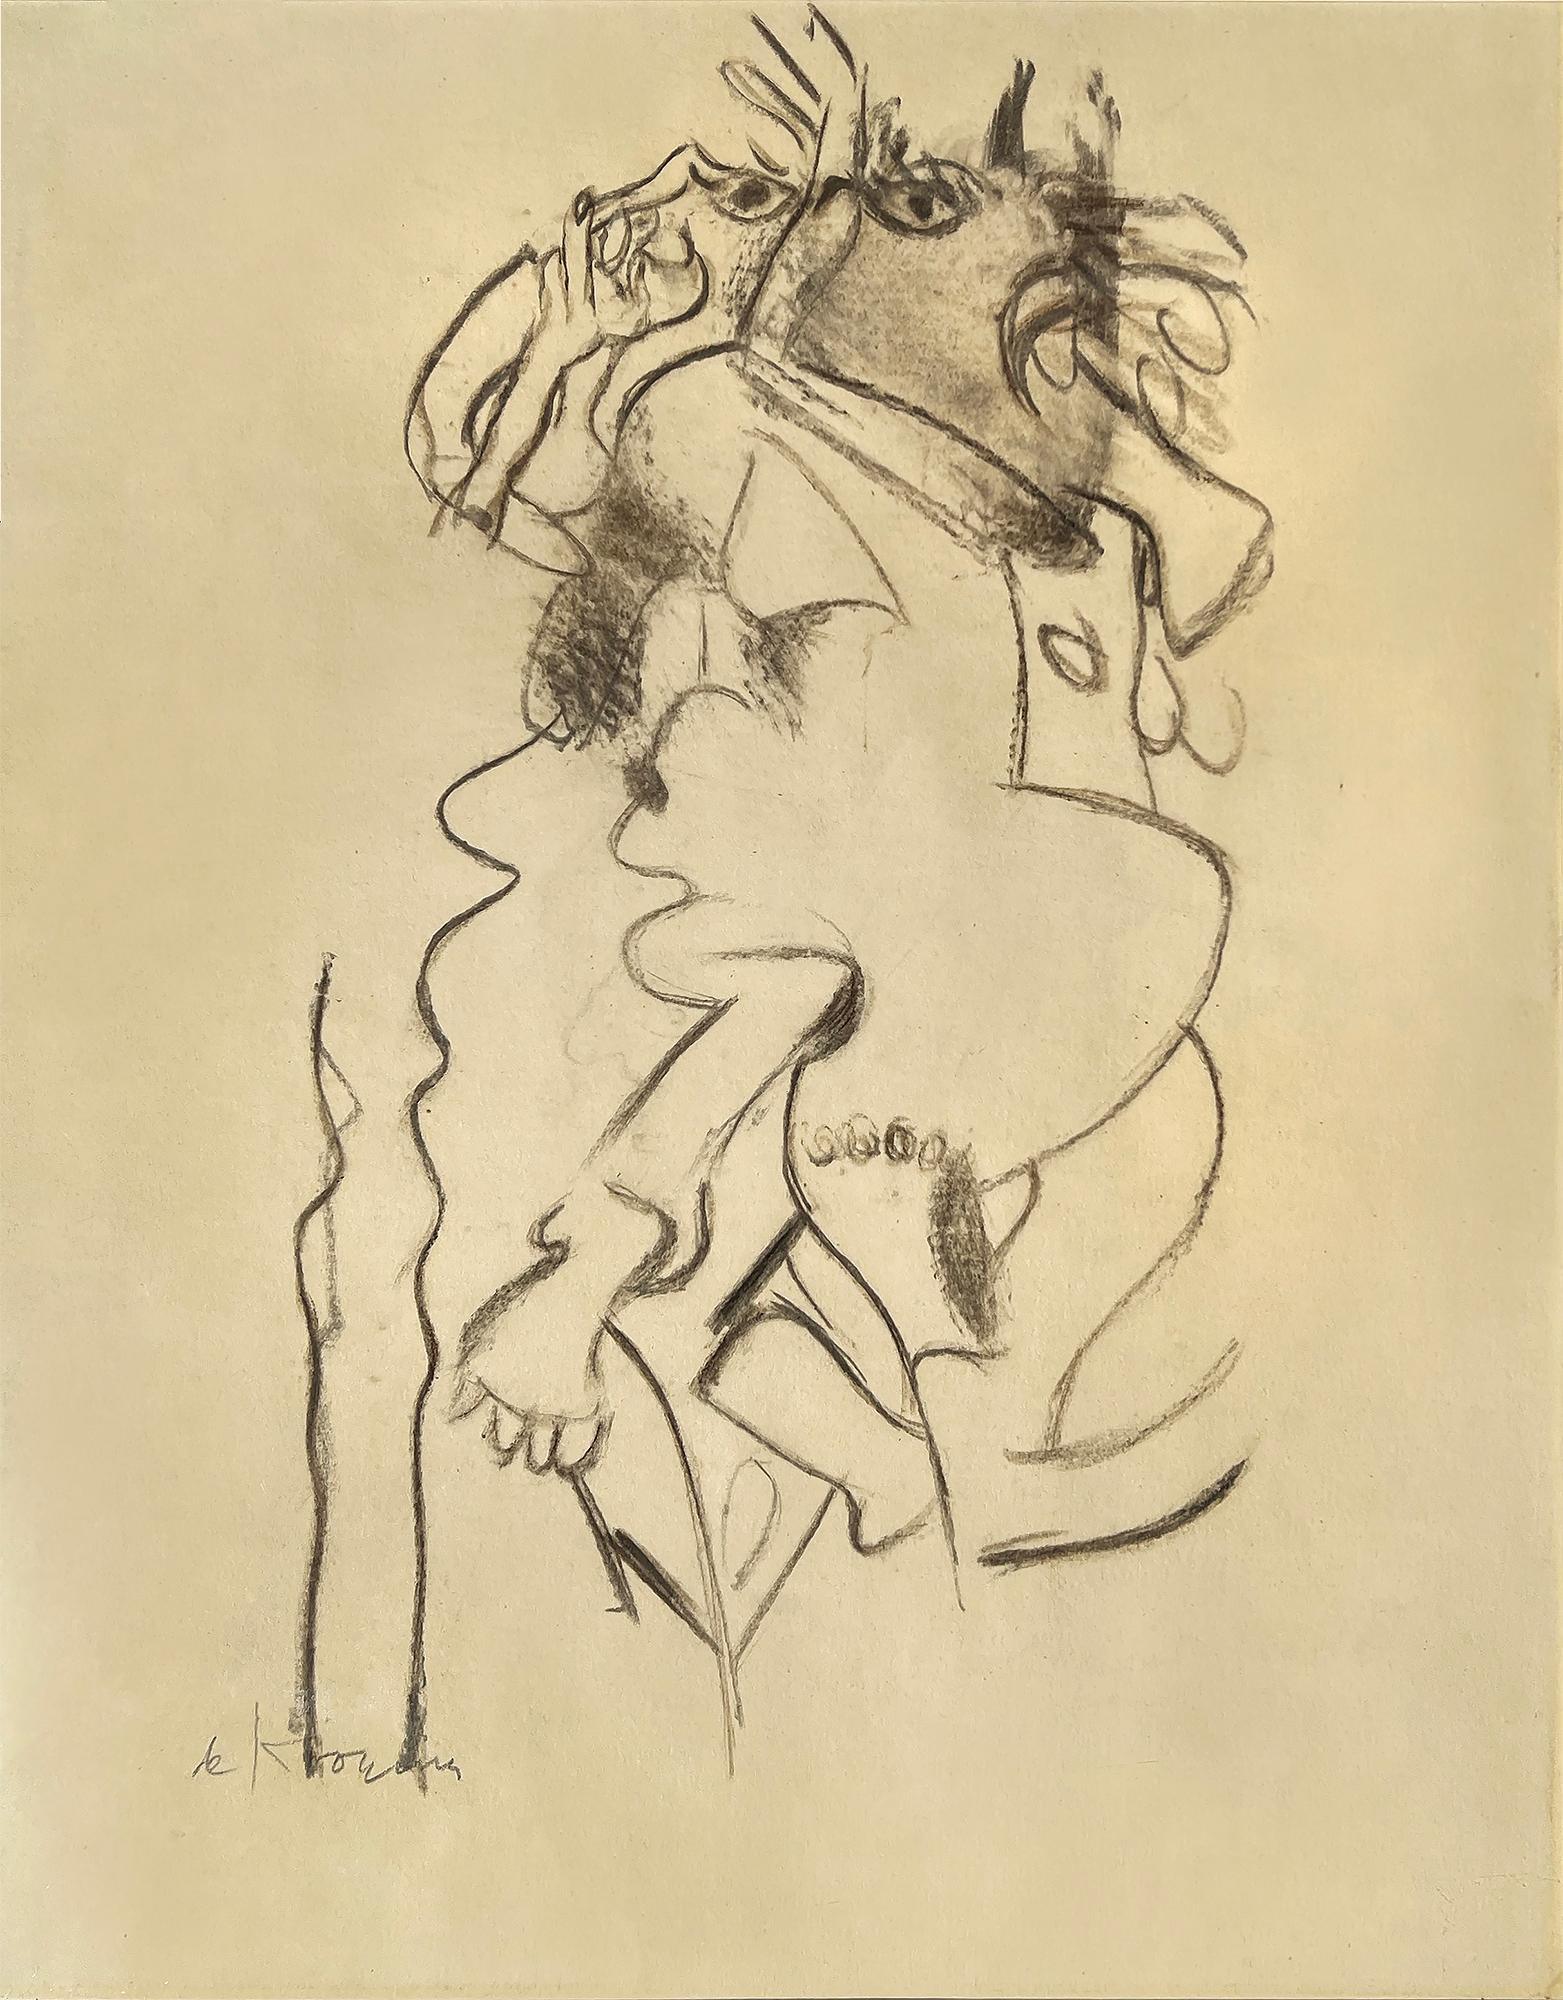 Willem de Kooning Abstract Drawing - The Thinker